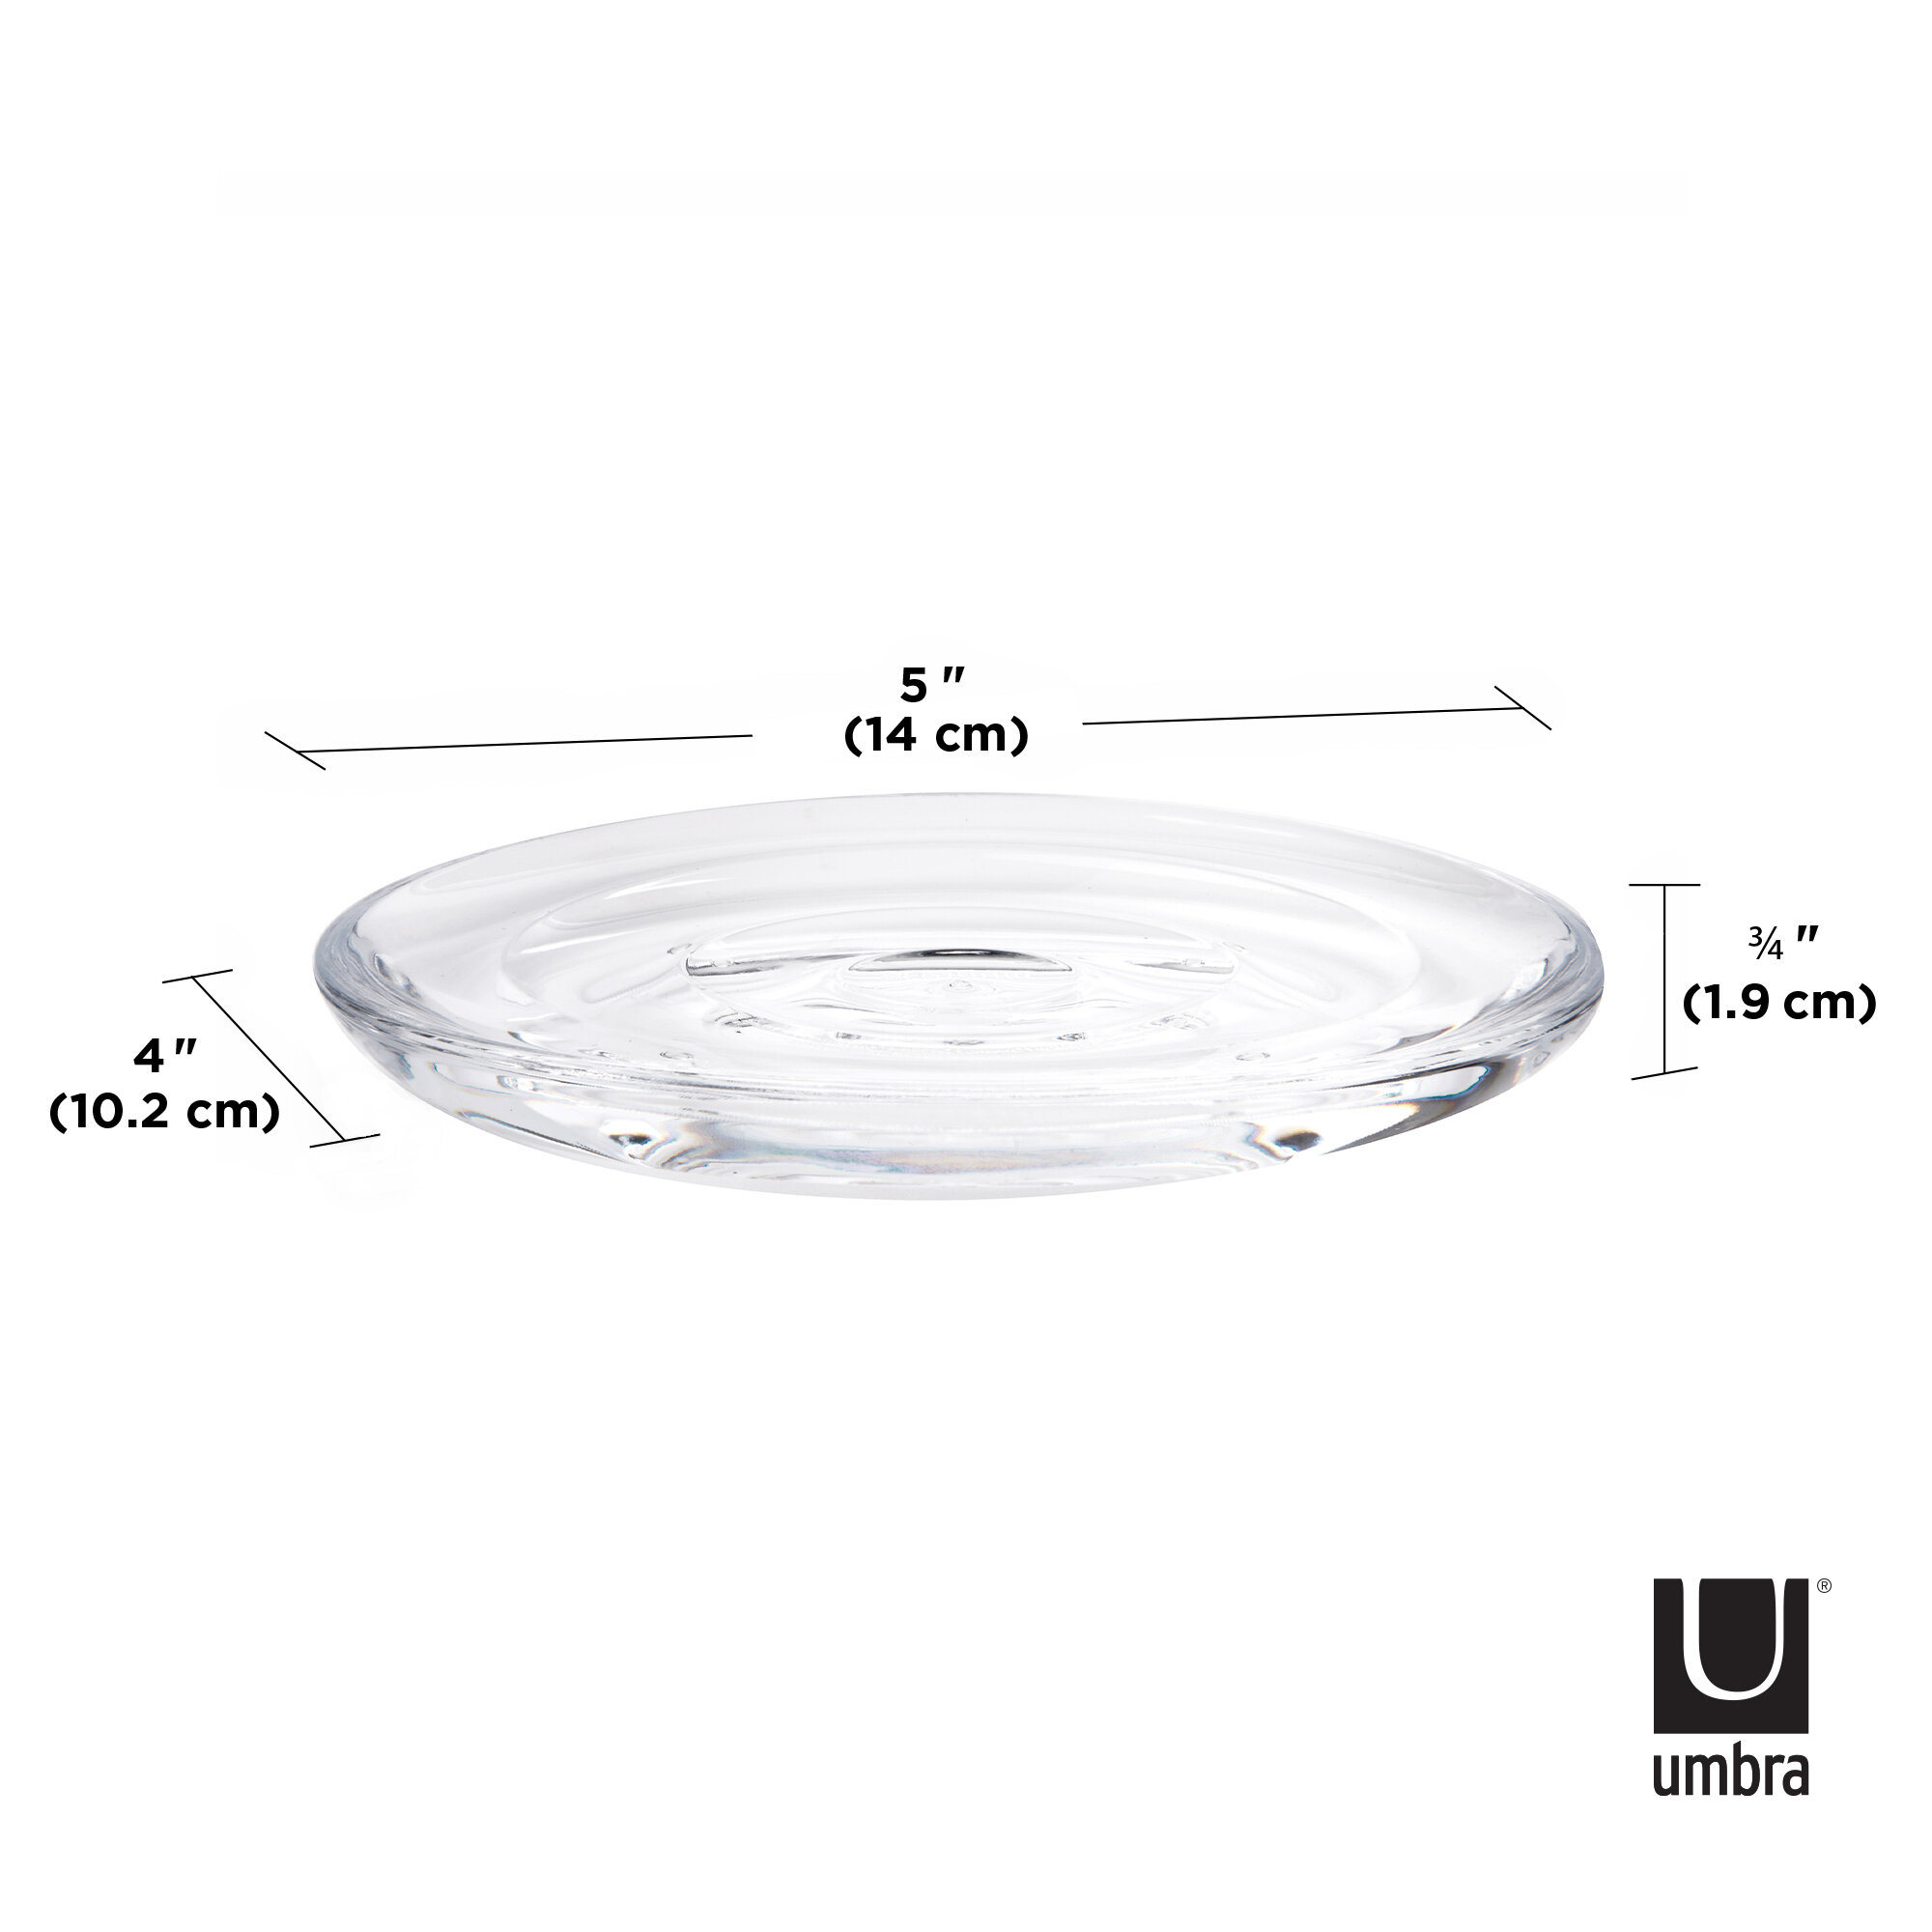 Bathroom Accessory Smoke Details about   Umbra Droplet Soap Dish heavy duty molded acrylic 